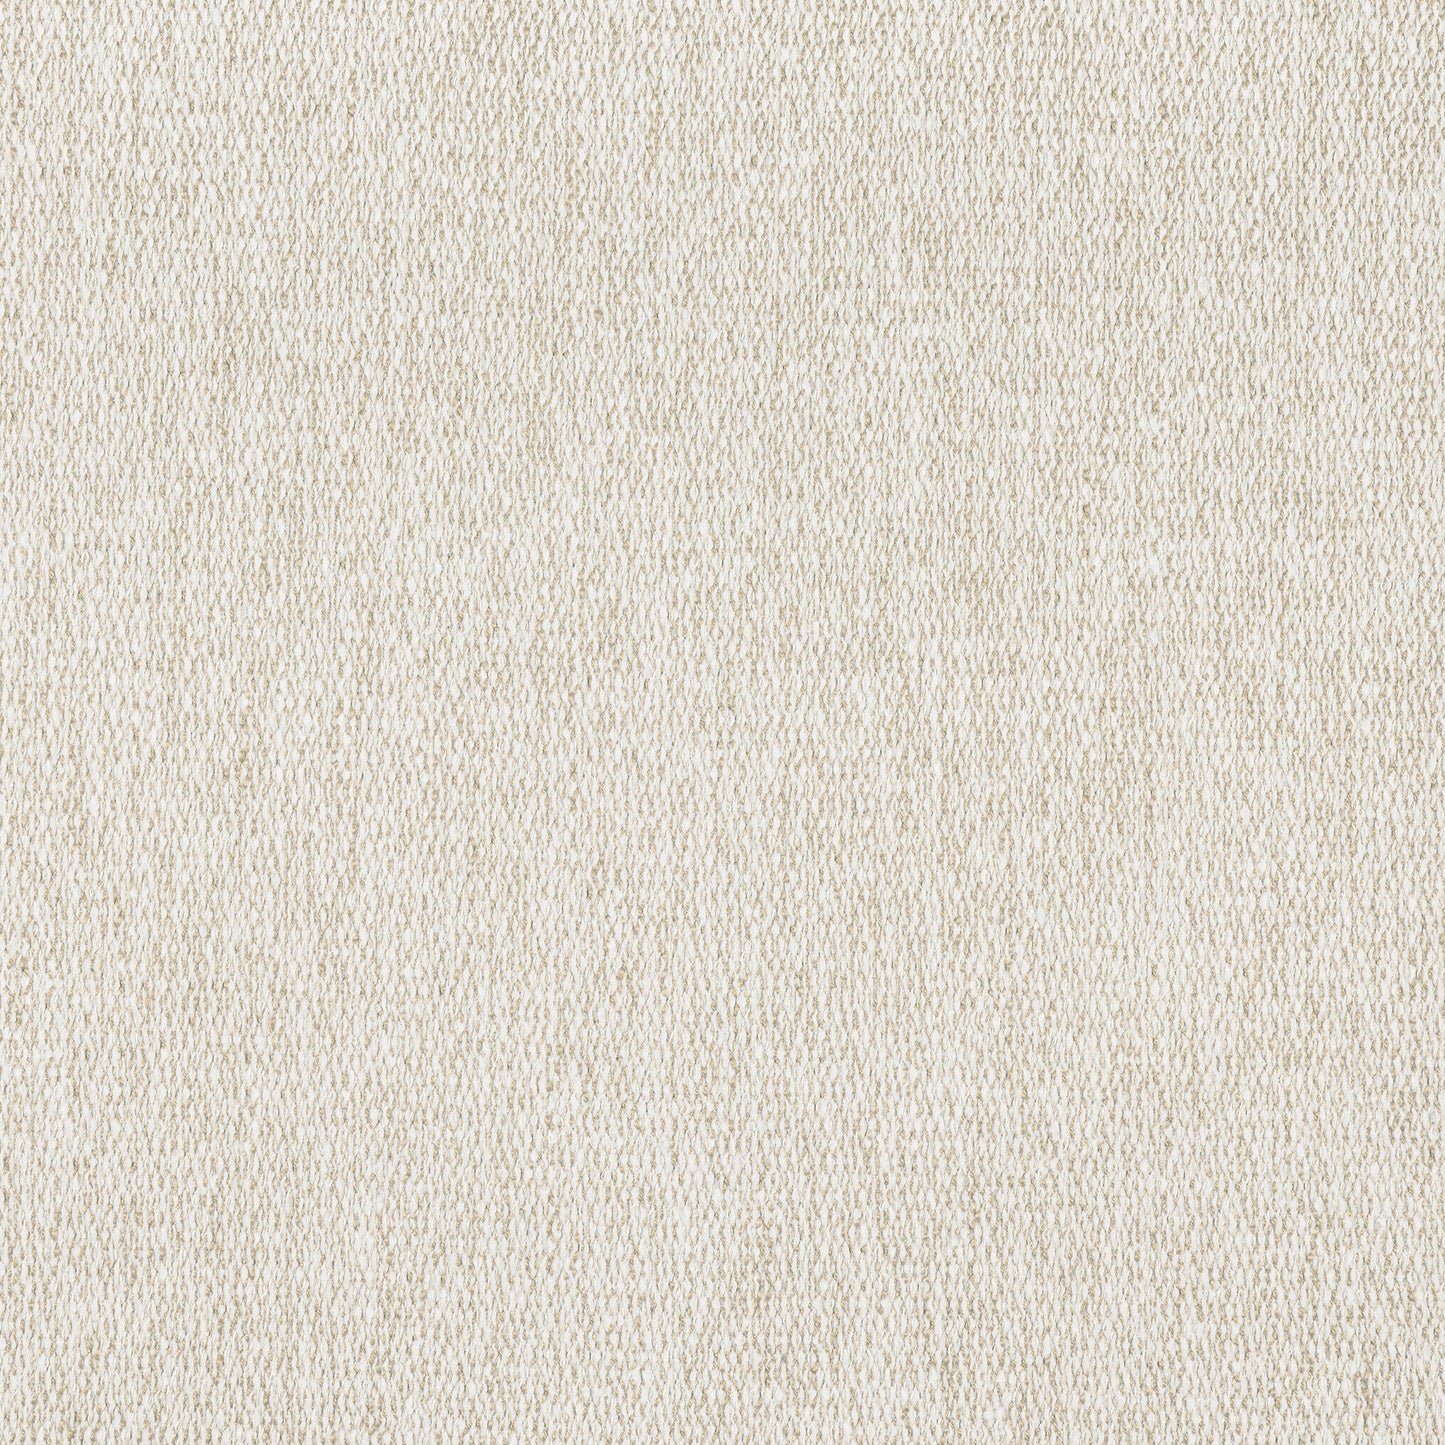 Purchase Thibaut Fabric Product# W8780 pattern name Arroyo color Almond